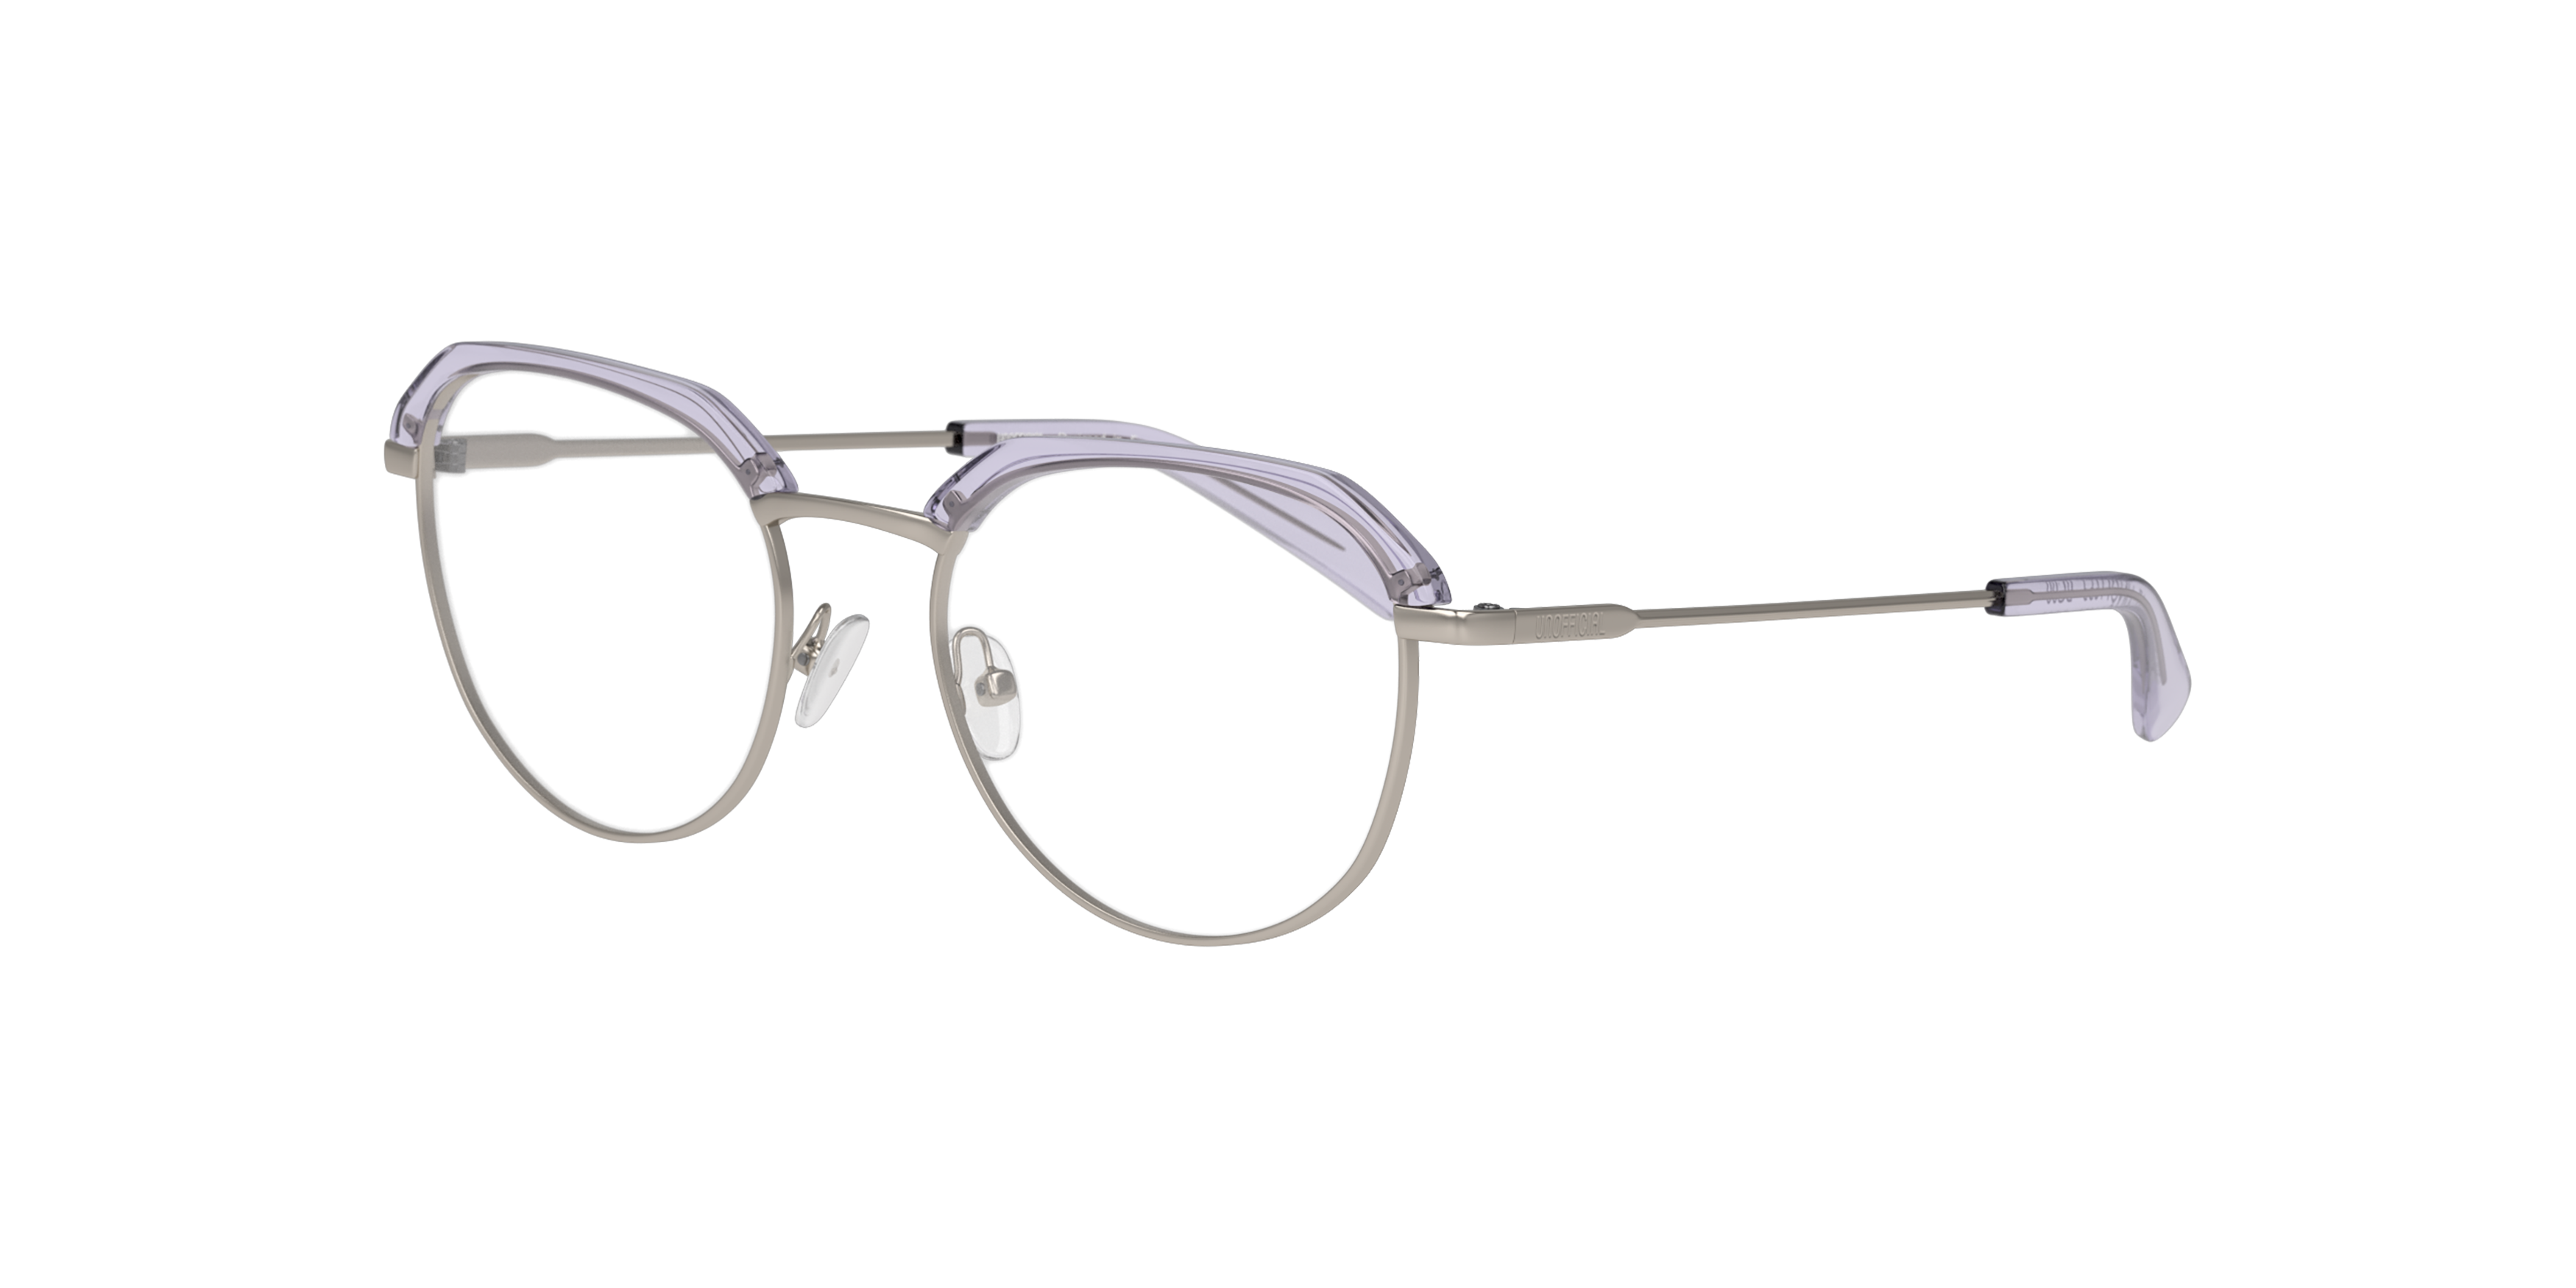 Angle_Left01 Unofficial UNOM0260 Glasses Transparent / Grey